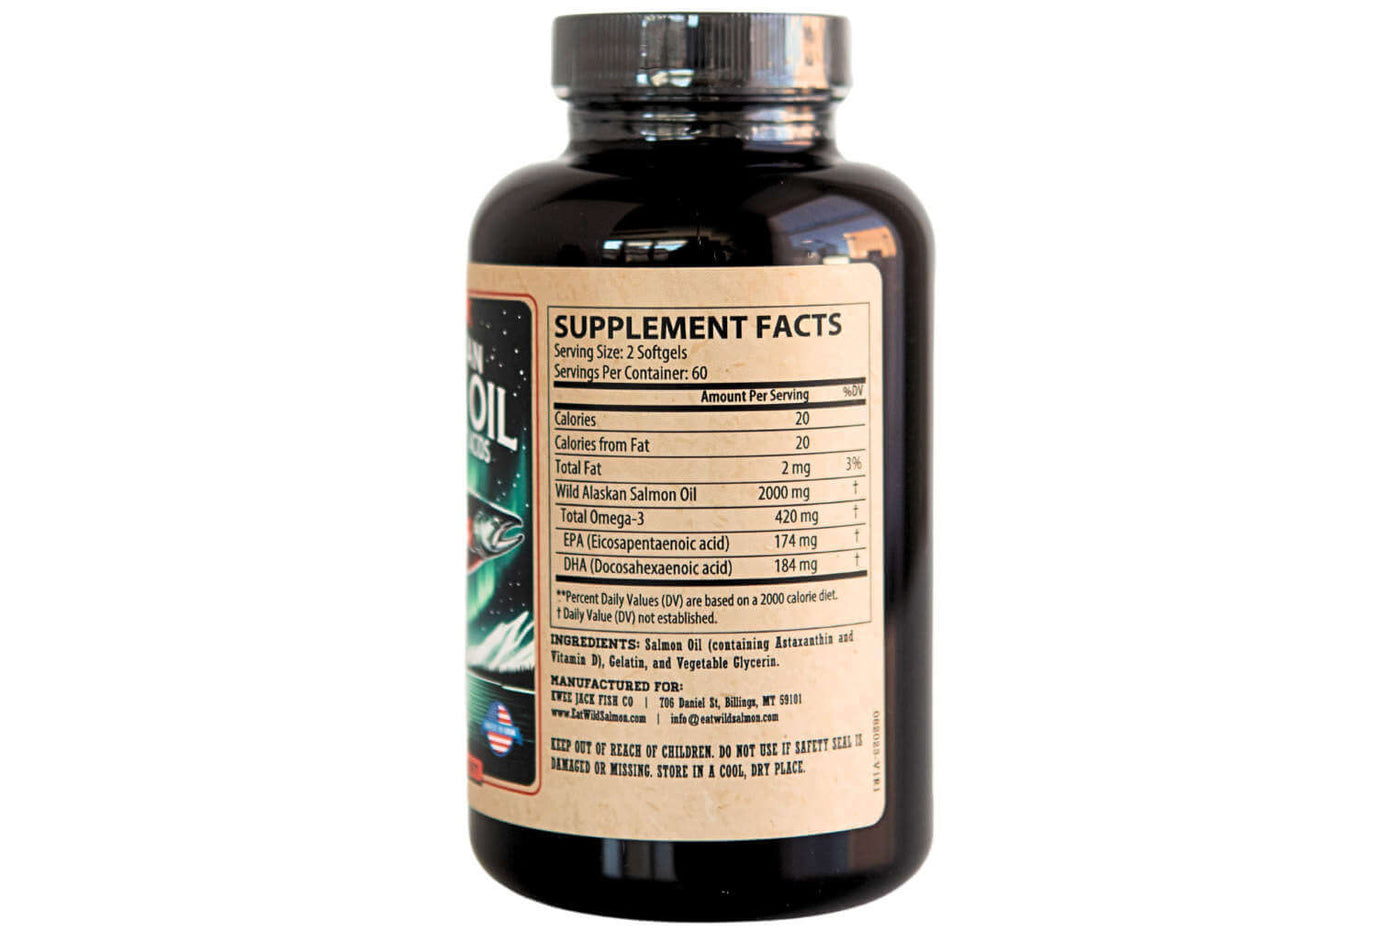 Supplement facts for Kwee-Jack Fish Co. wild Alaskan salmon oil.